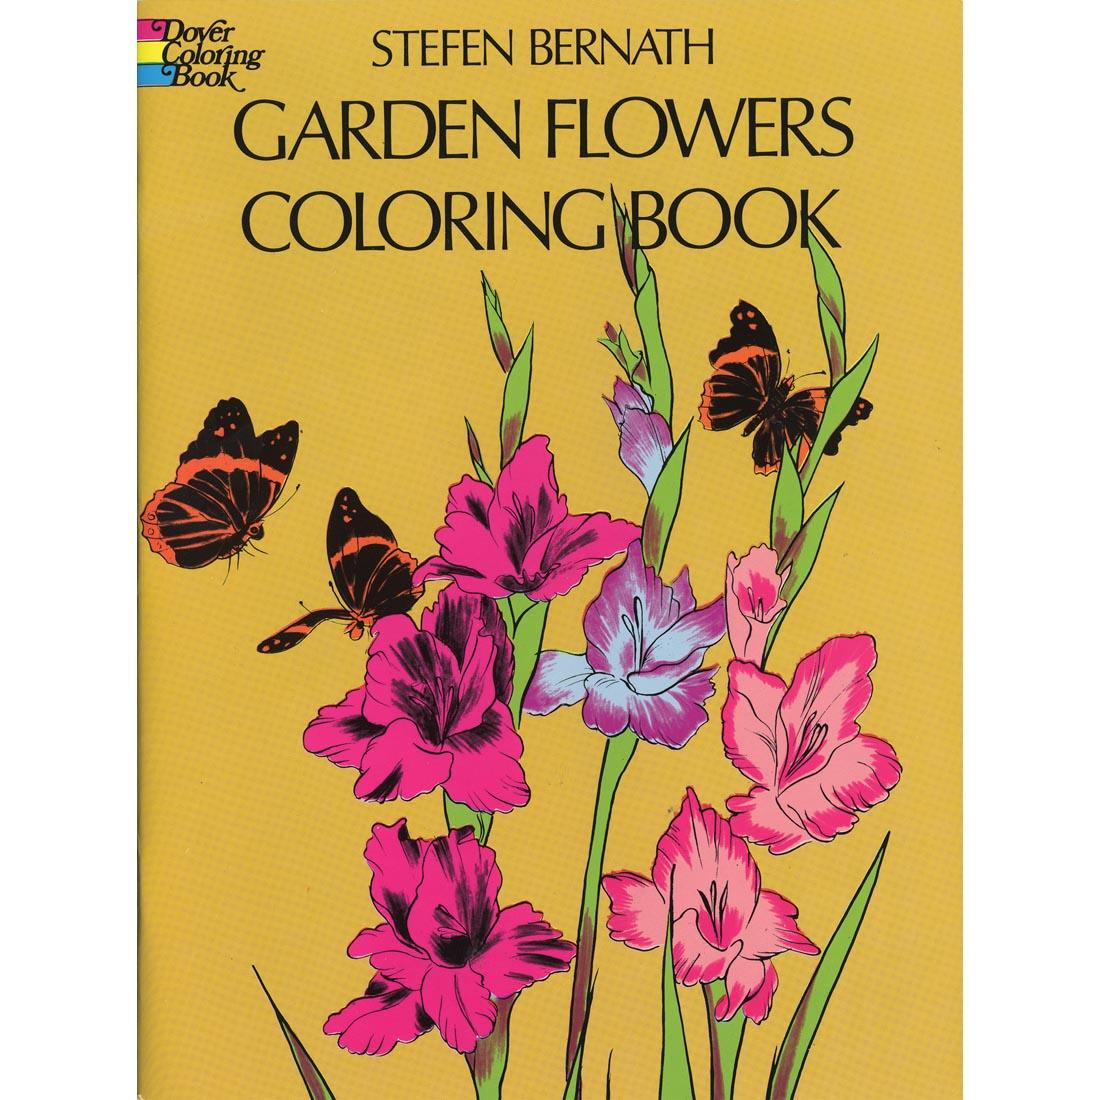 Garden Flowers Coloring Book by Dover